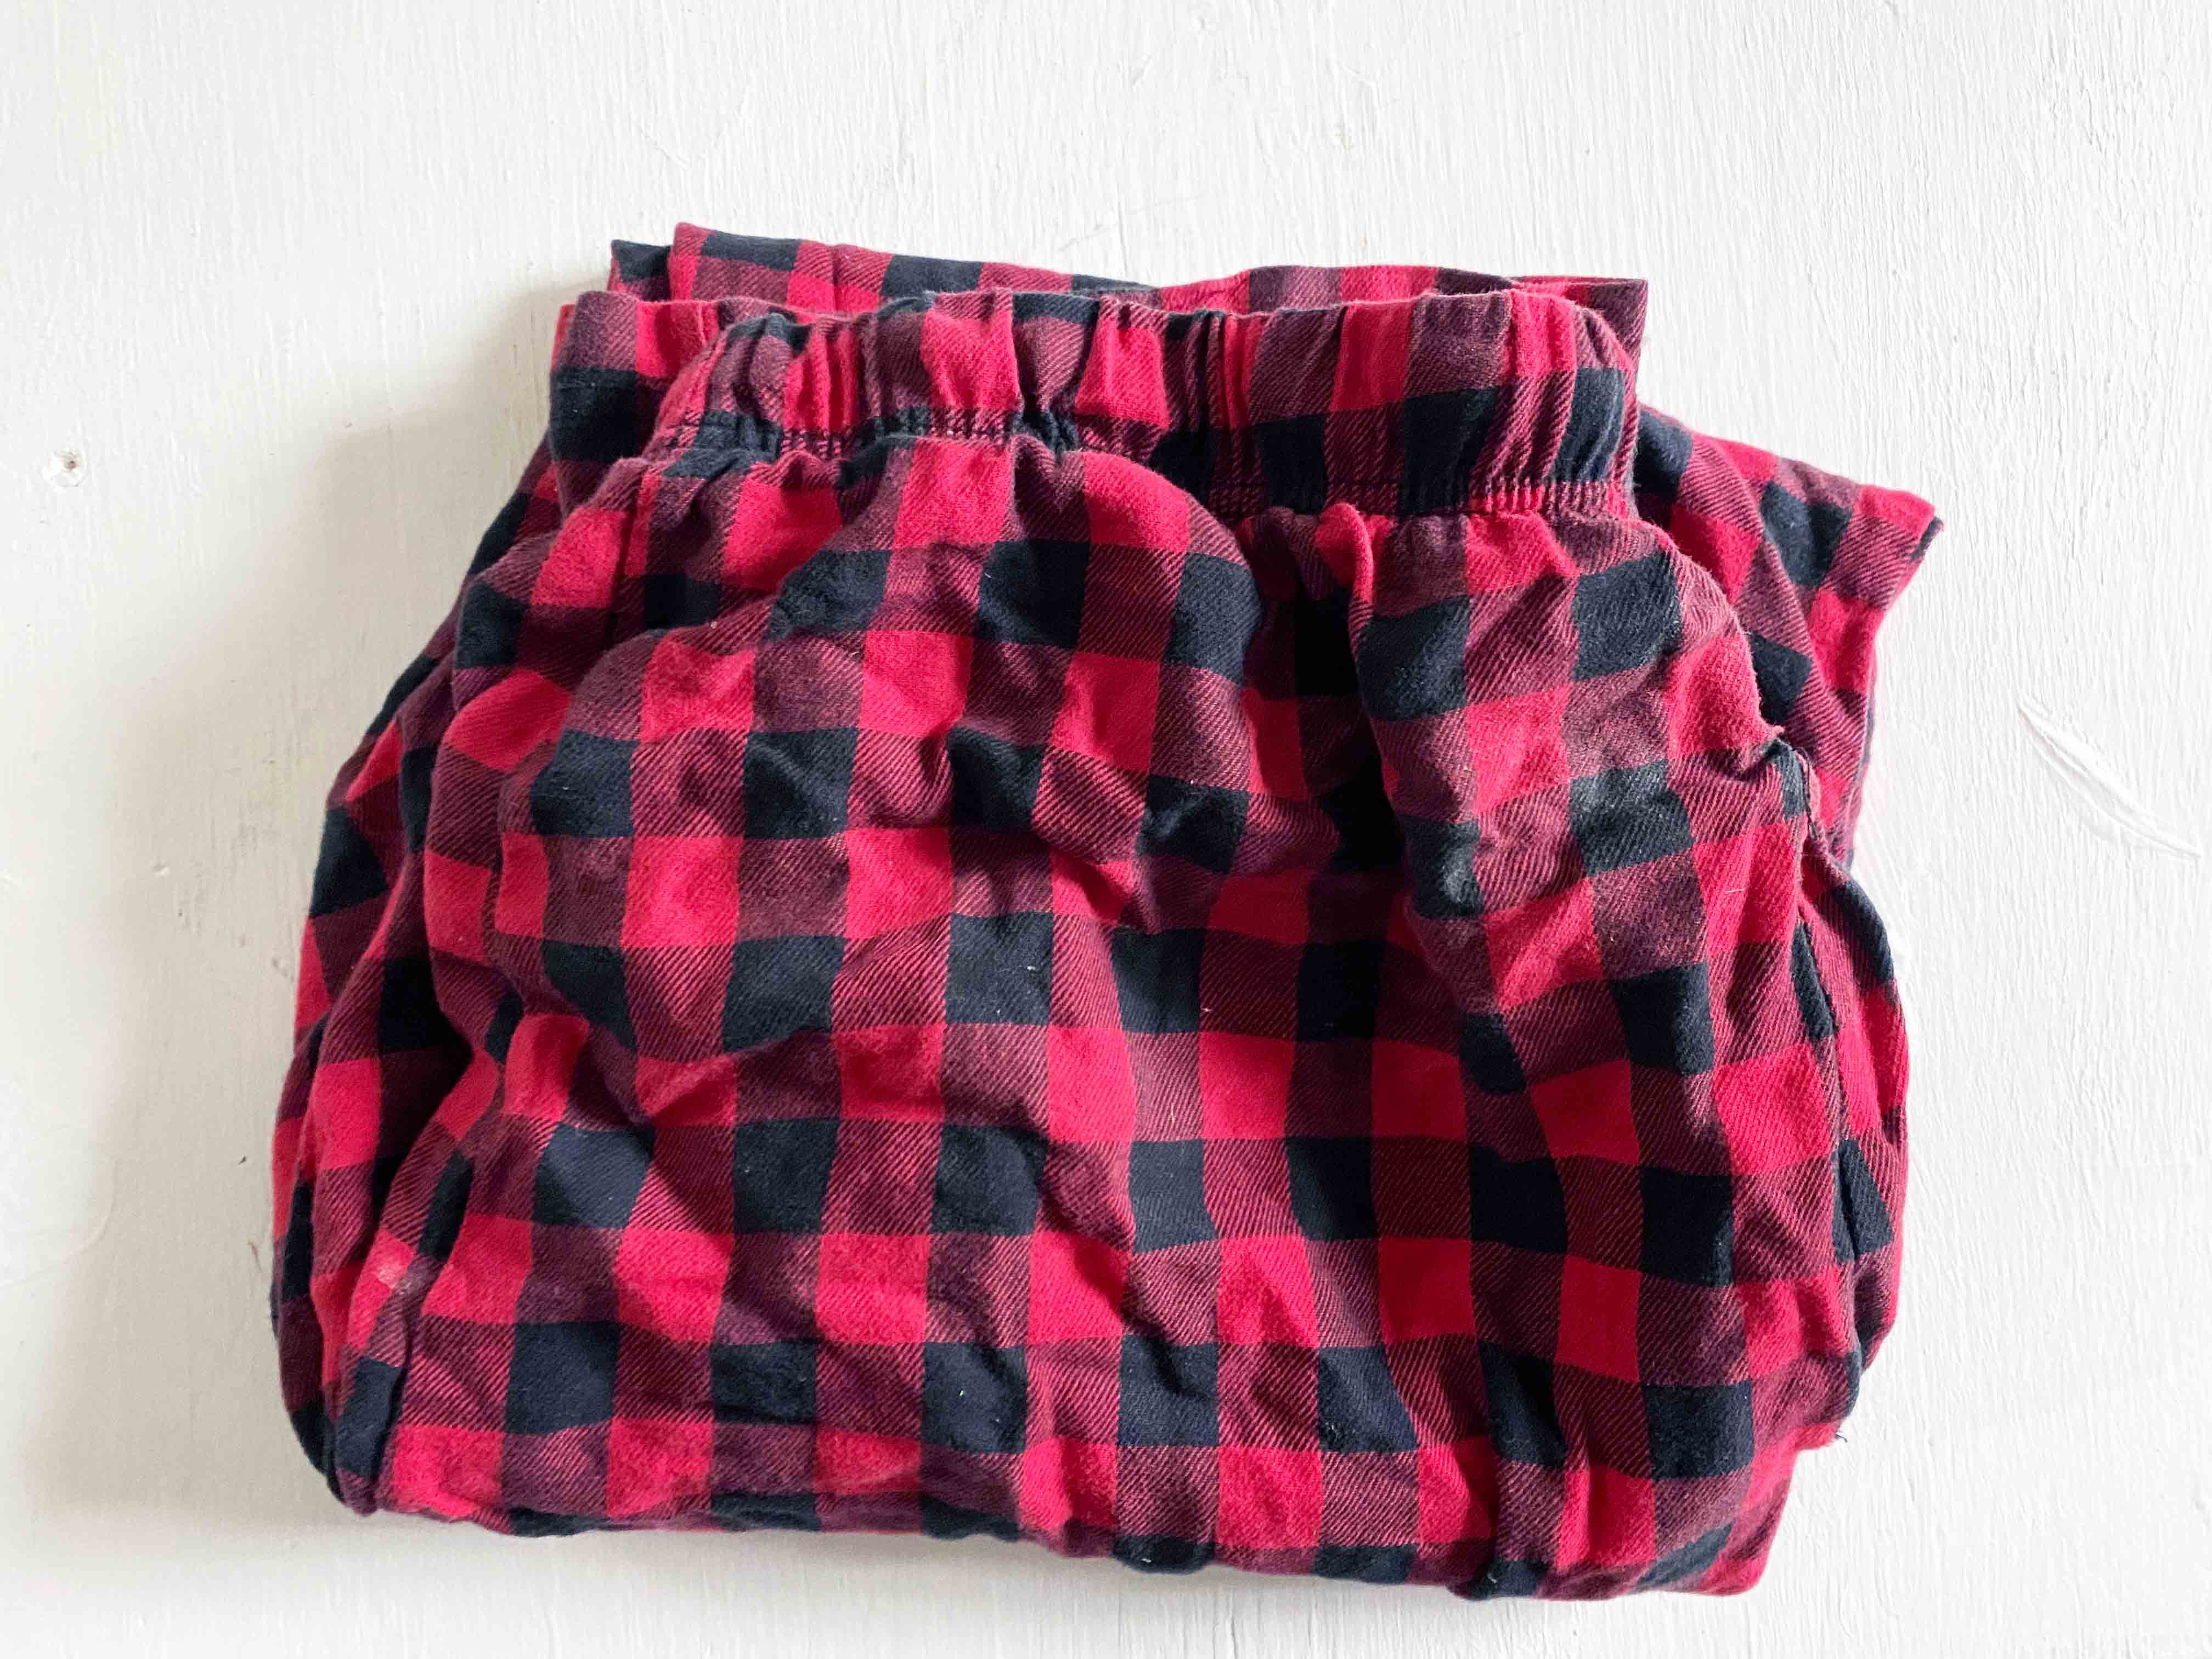 fold pair of red flannel pajama pants